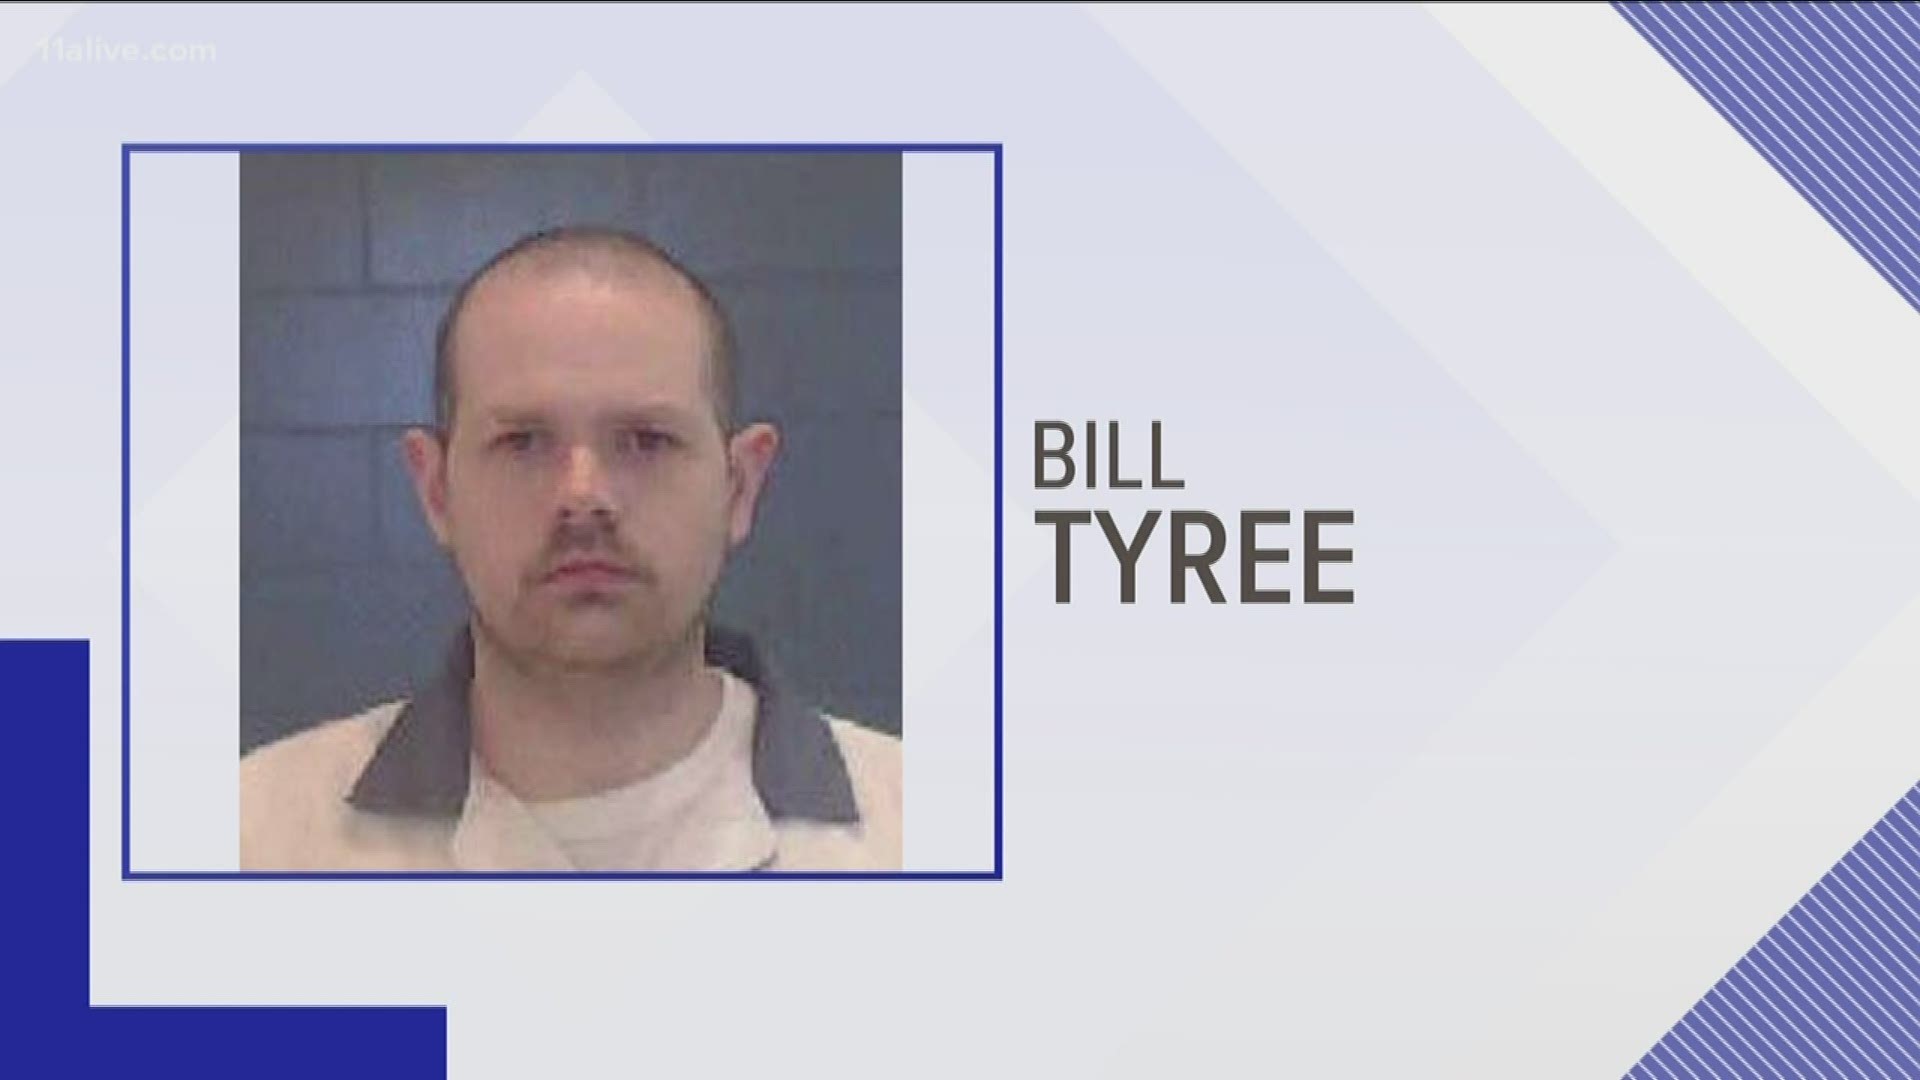 Authorities said William "Bill" Tyree has ties to the Ghostface gangsters and was arrested in connection with a deadly Coweta County home invasion.